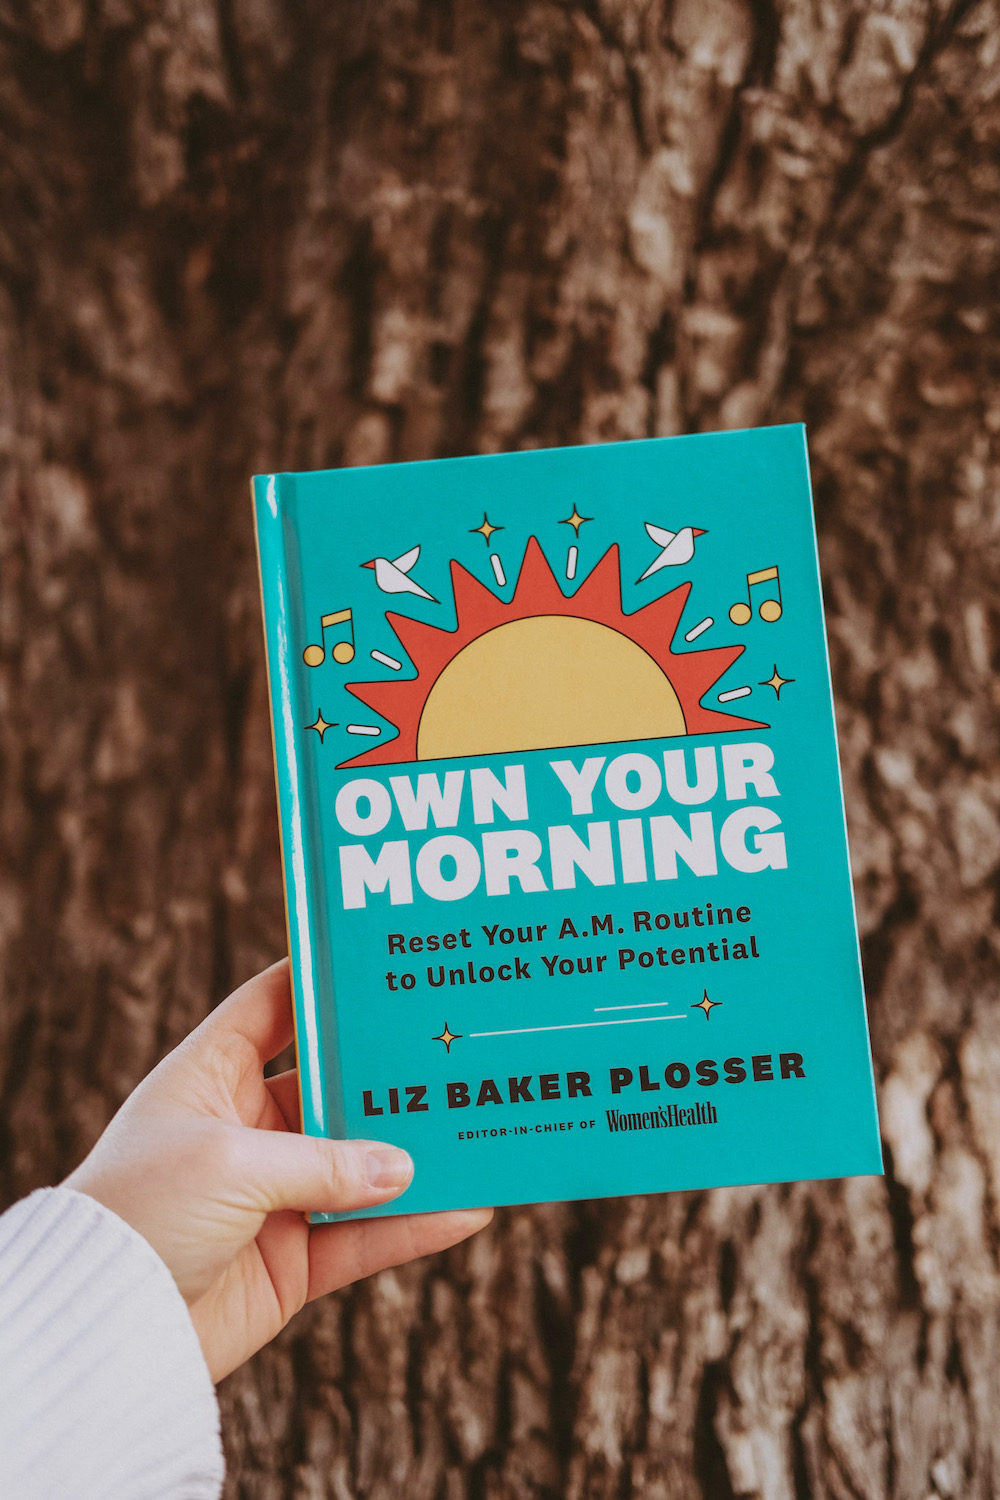 Photo of the Own Your Morning book